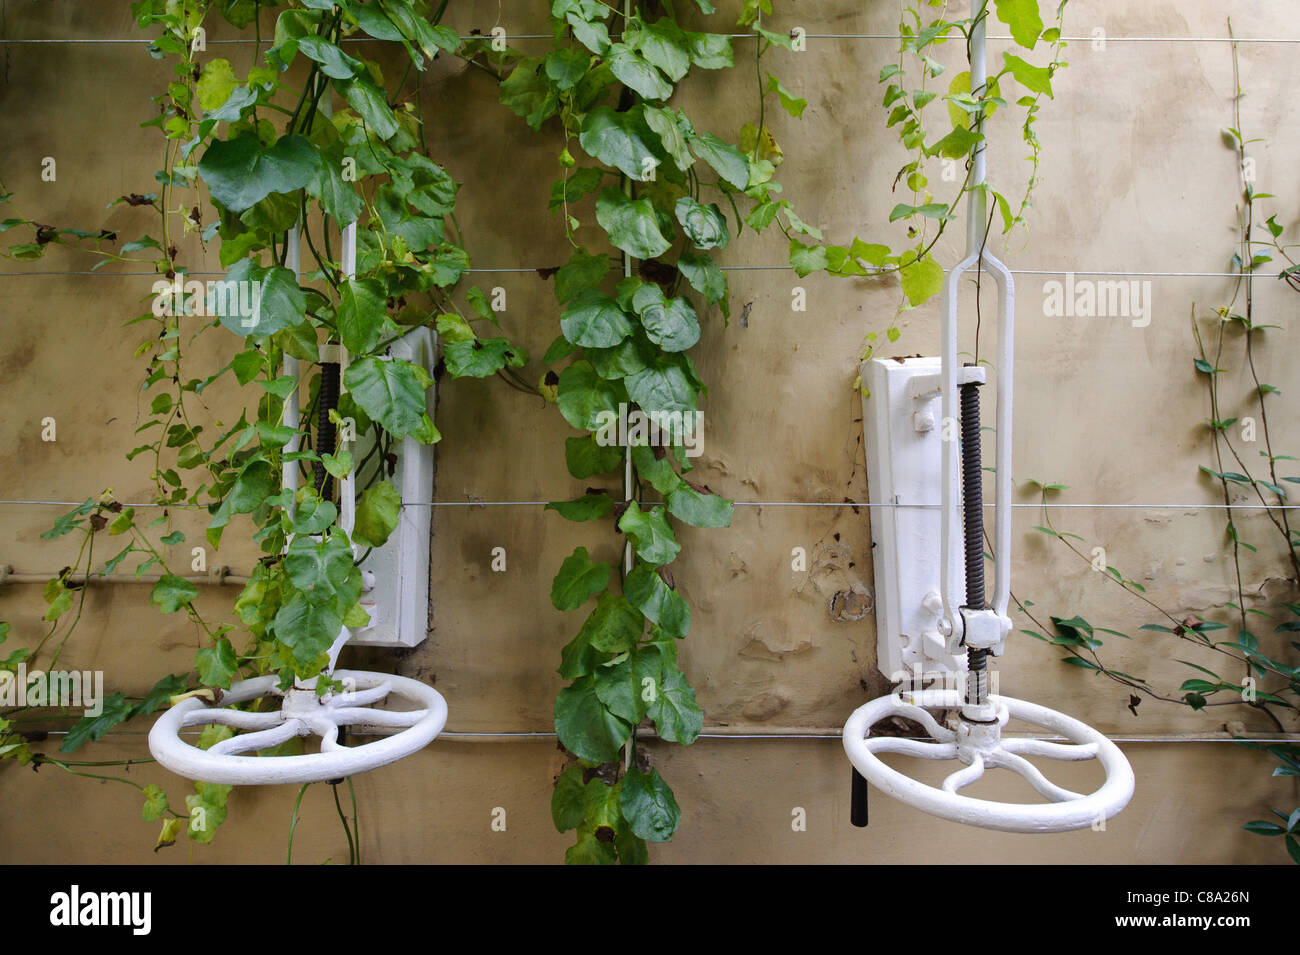 Two handwheels and screwrods to manually operate window ventilation in a large greenhouse Stock Photo